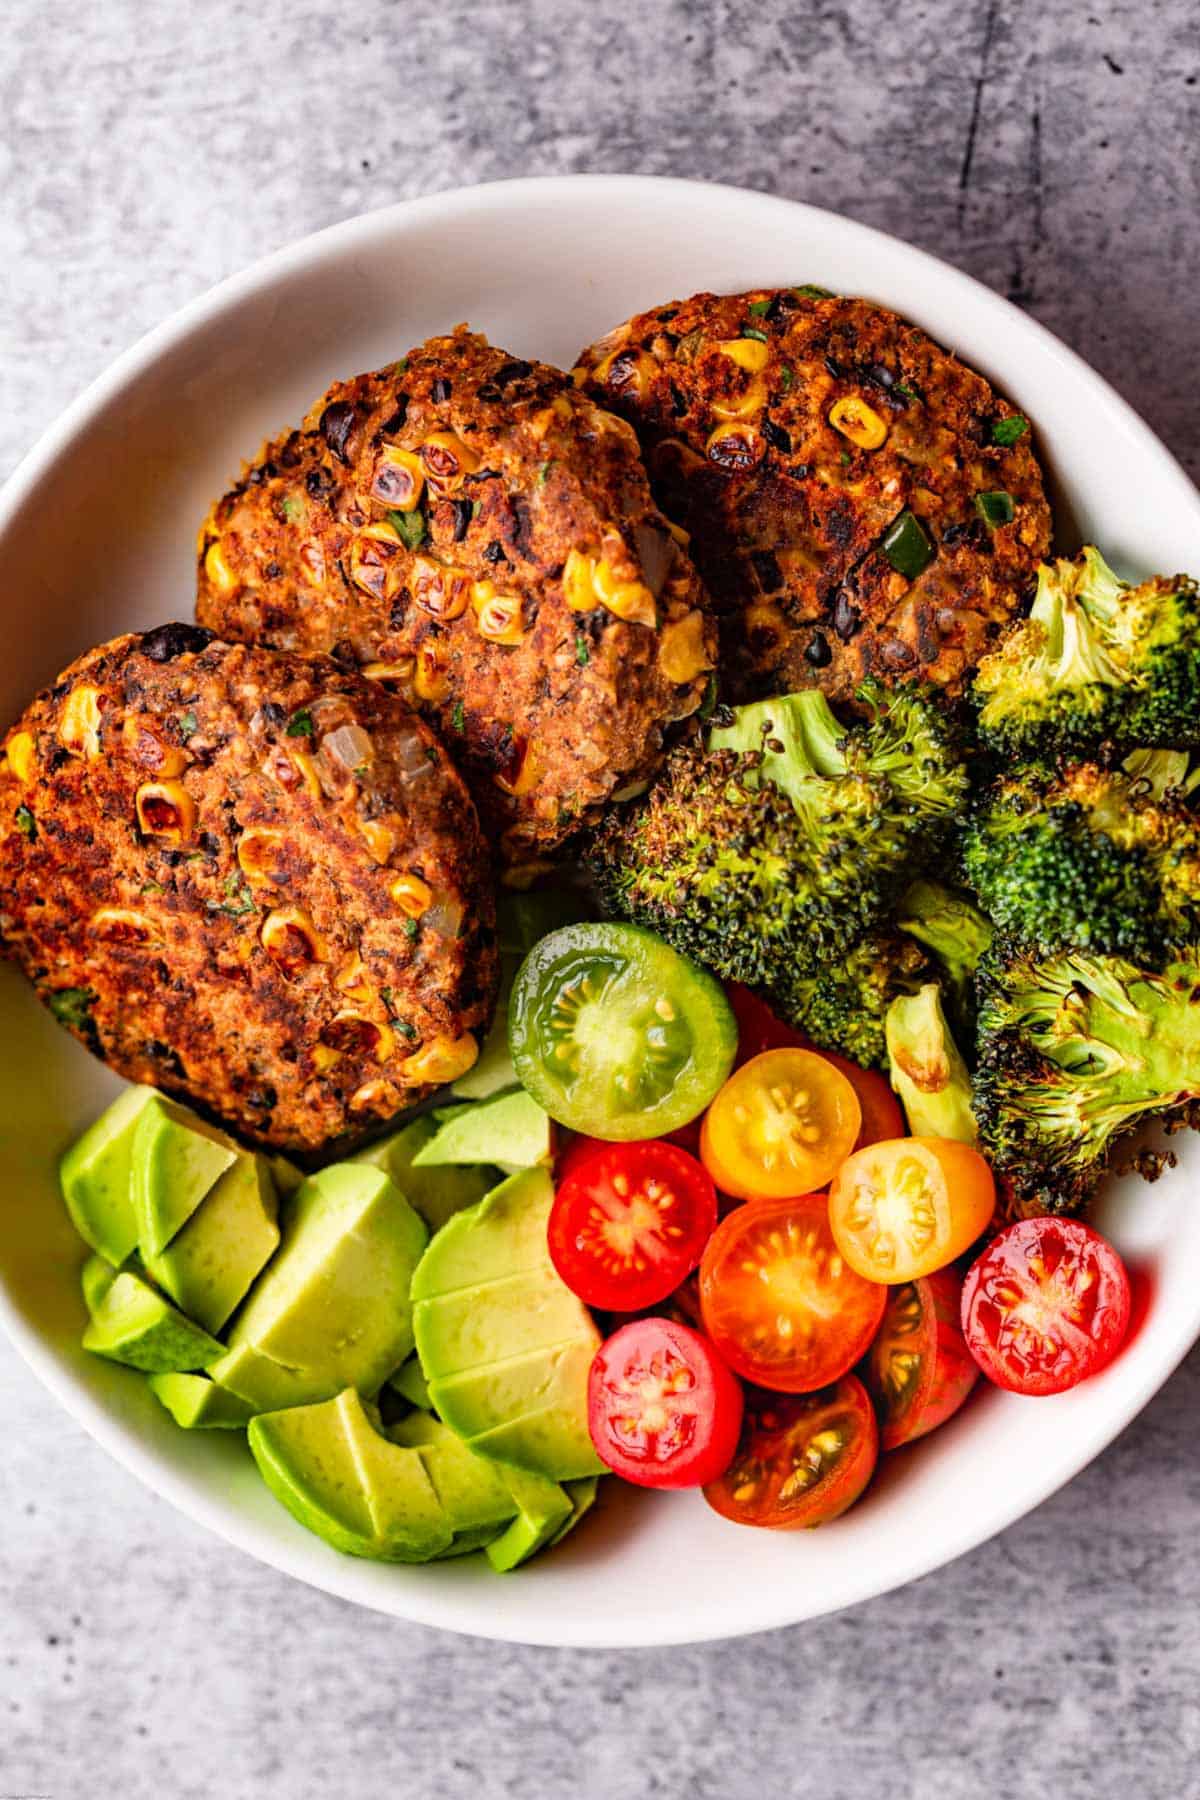 Three meat-like black bean corn burgers, red and yellow sliced cherry tomatoes, chopped avocado, and roasted broccoli in a white bowl.